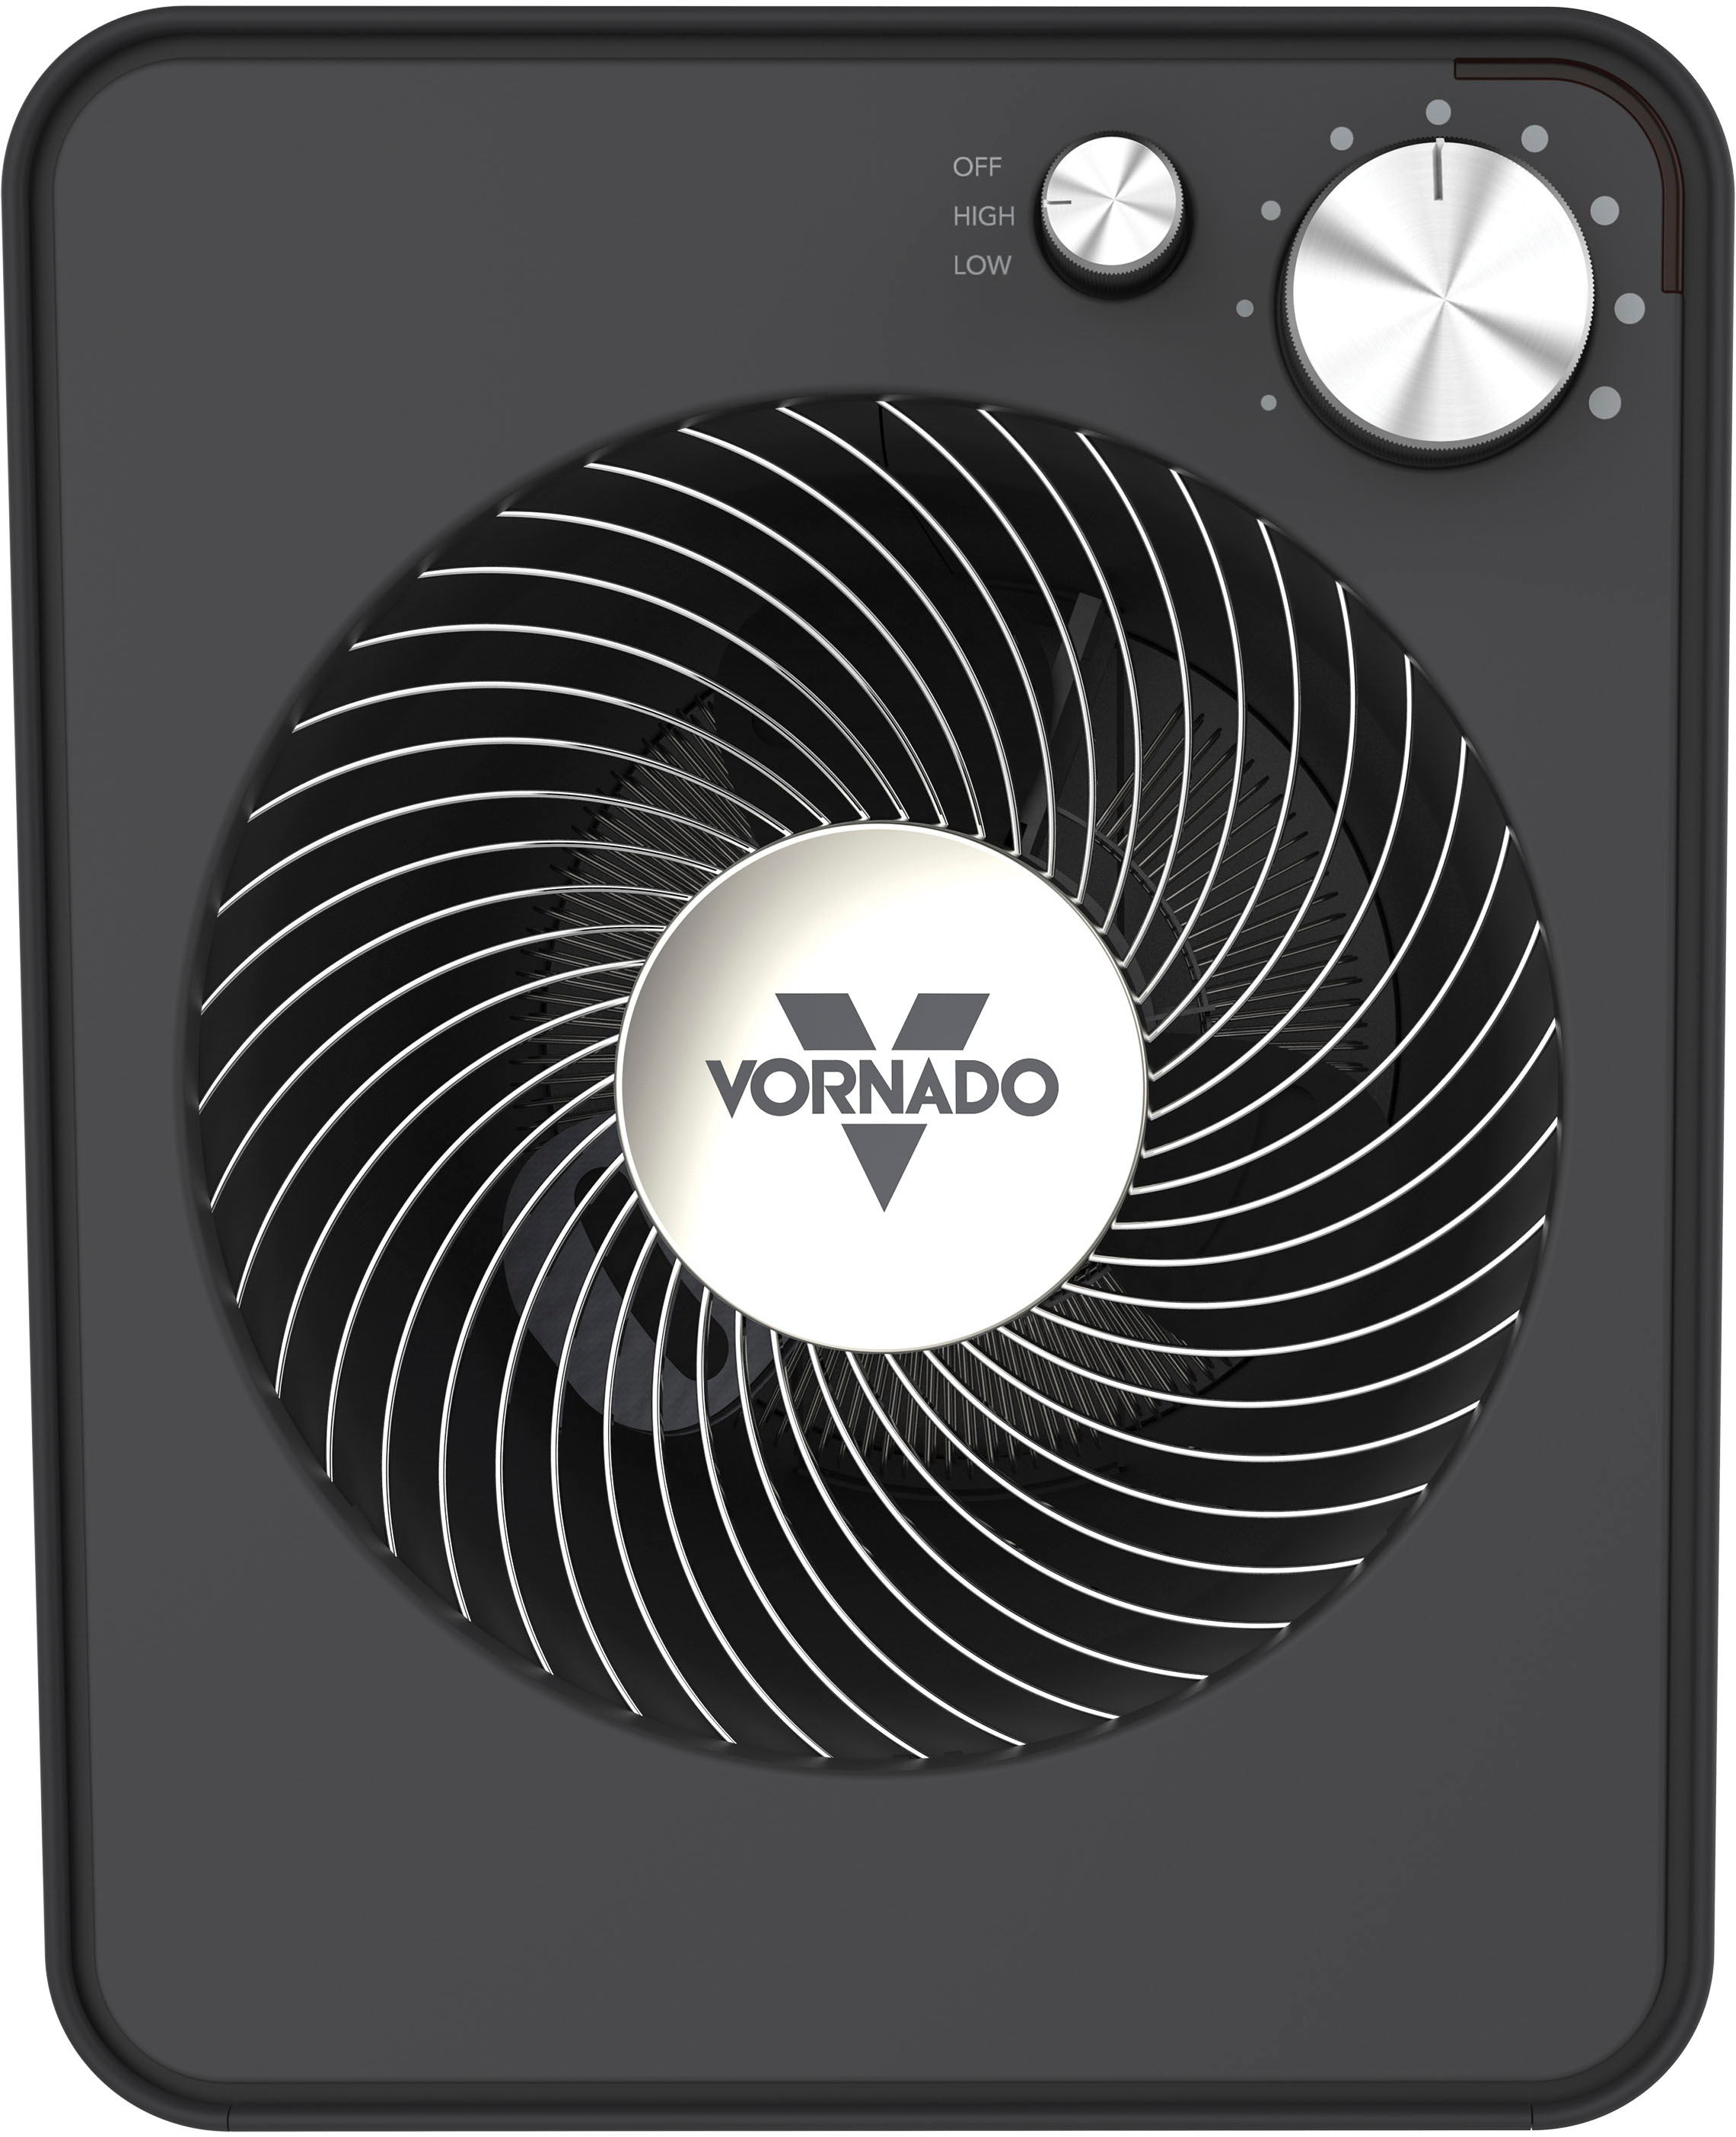 Angle View: Evapolar - Indoor Portable Evaporative Cooler with Air Humidifier - Crystal white